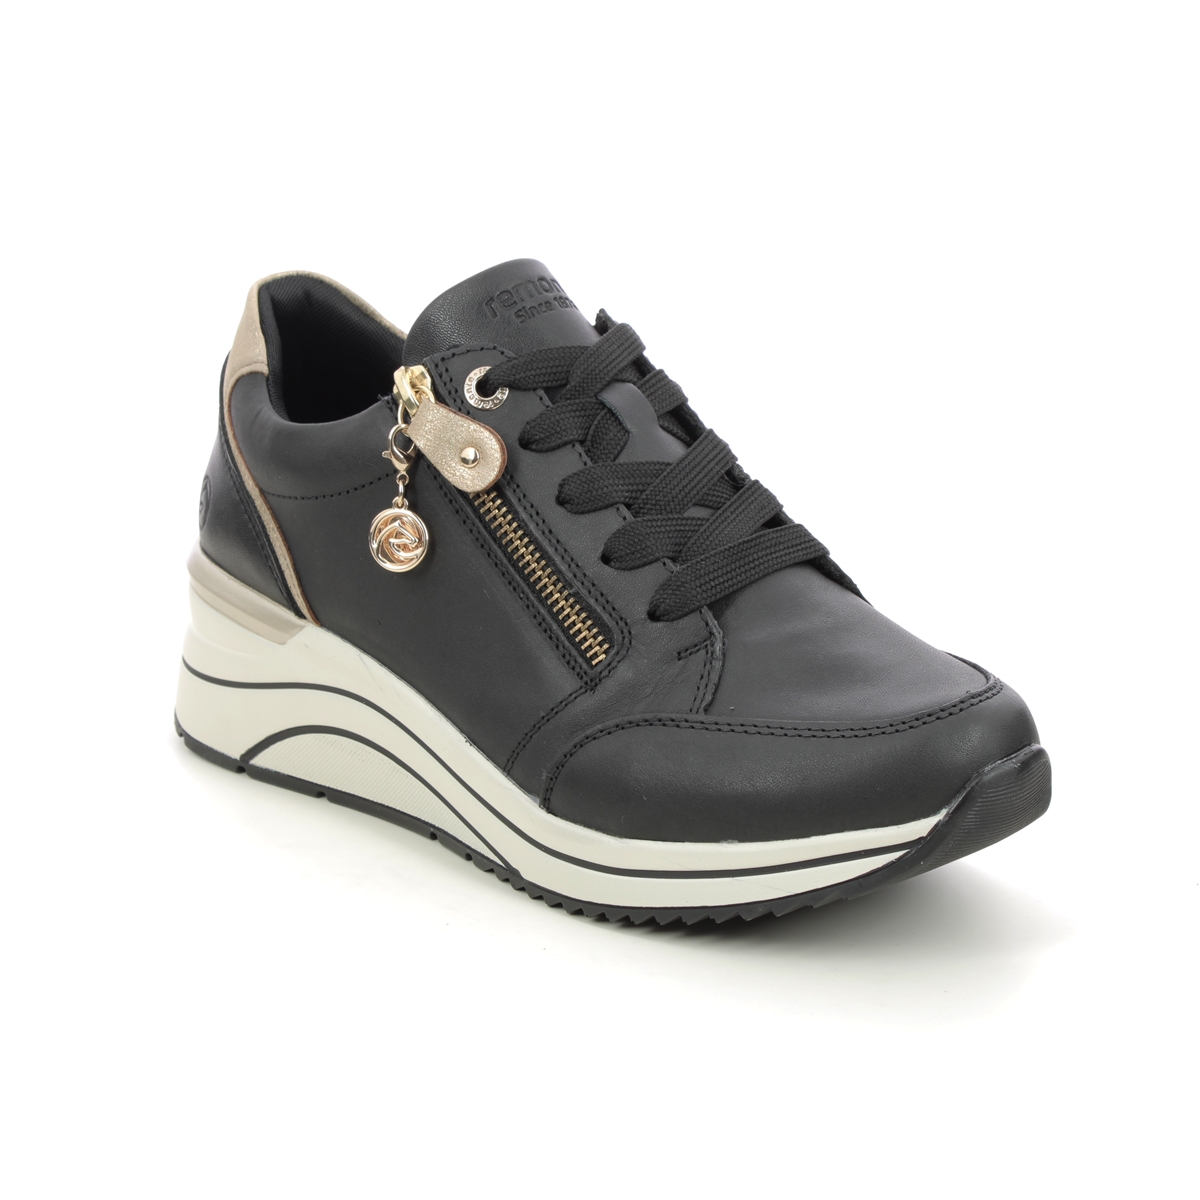 Remonte Ranzip Wedge Black Leather Womens Trainers D0T03-01 In Size 38 In Plain Black Leather